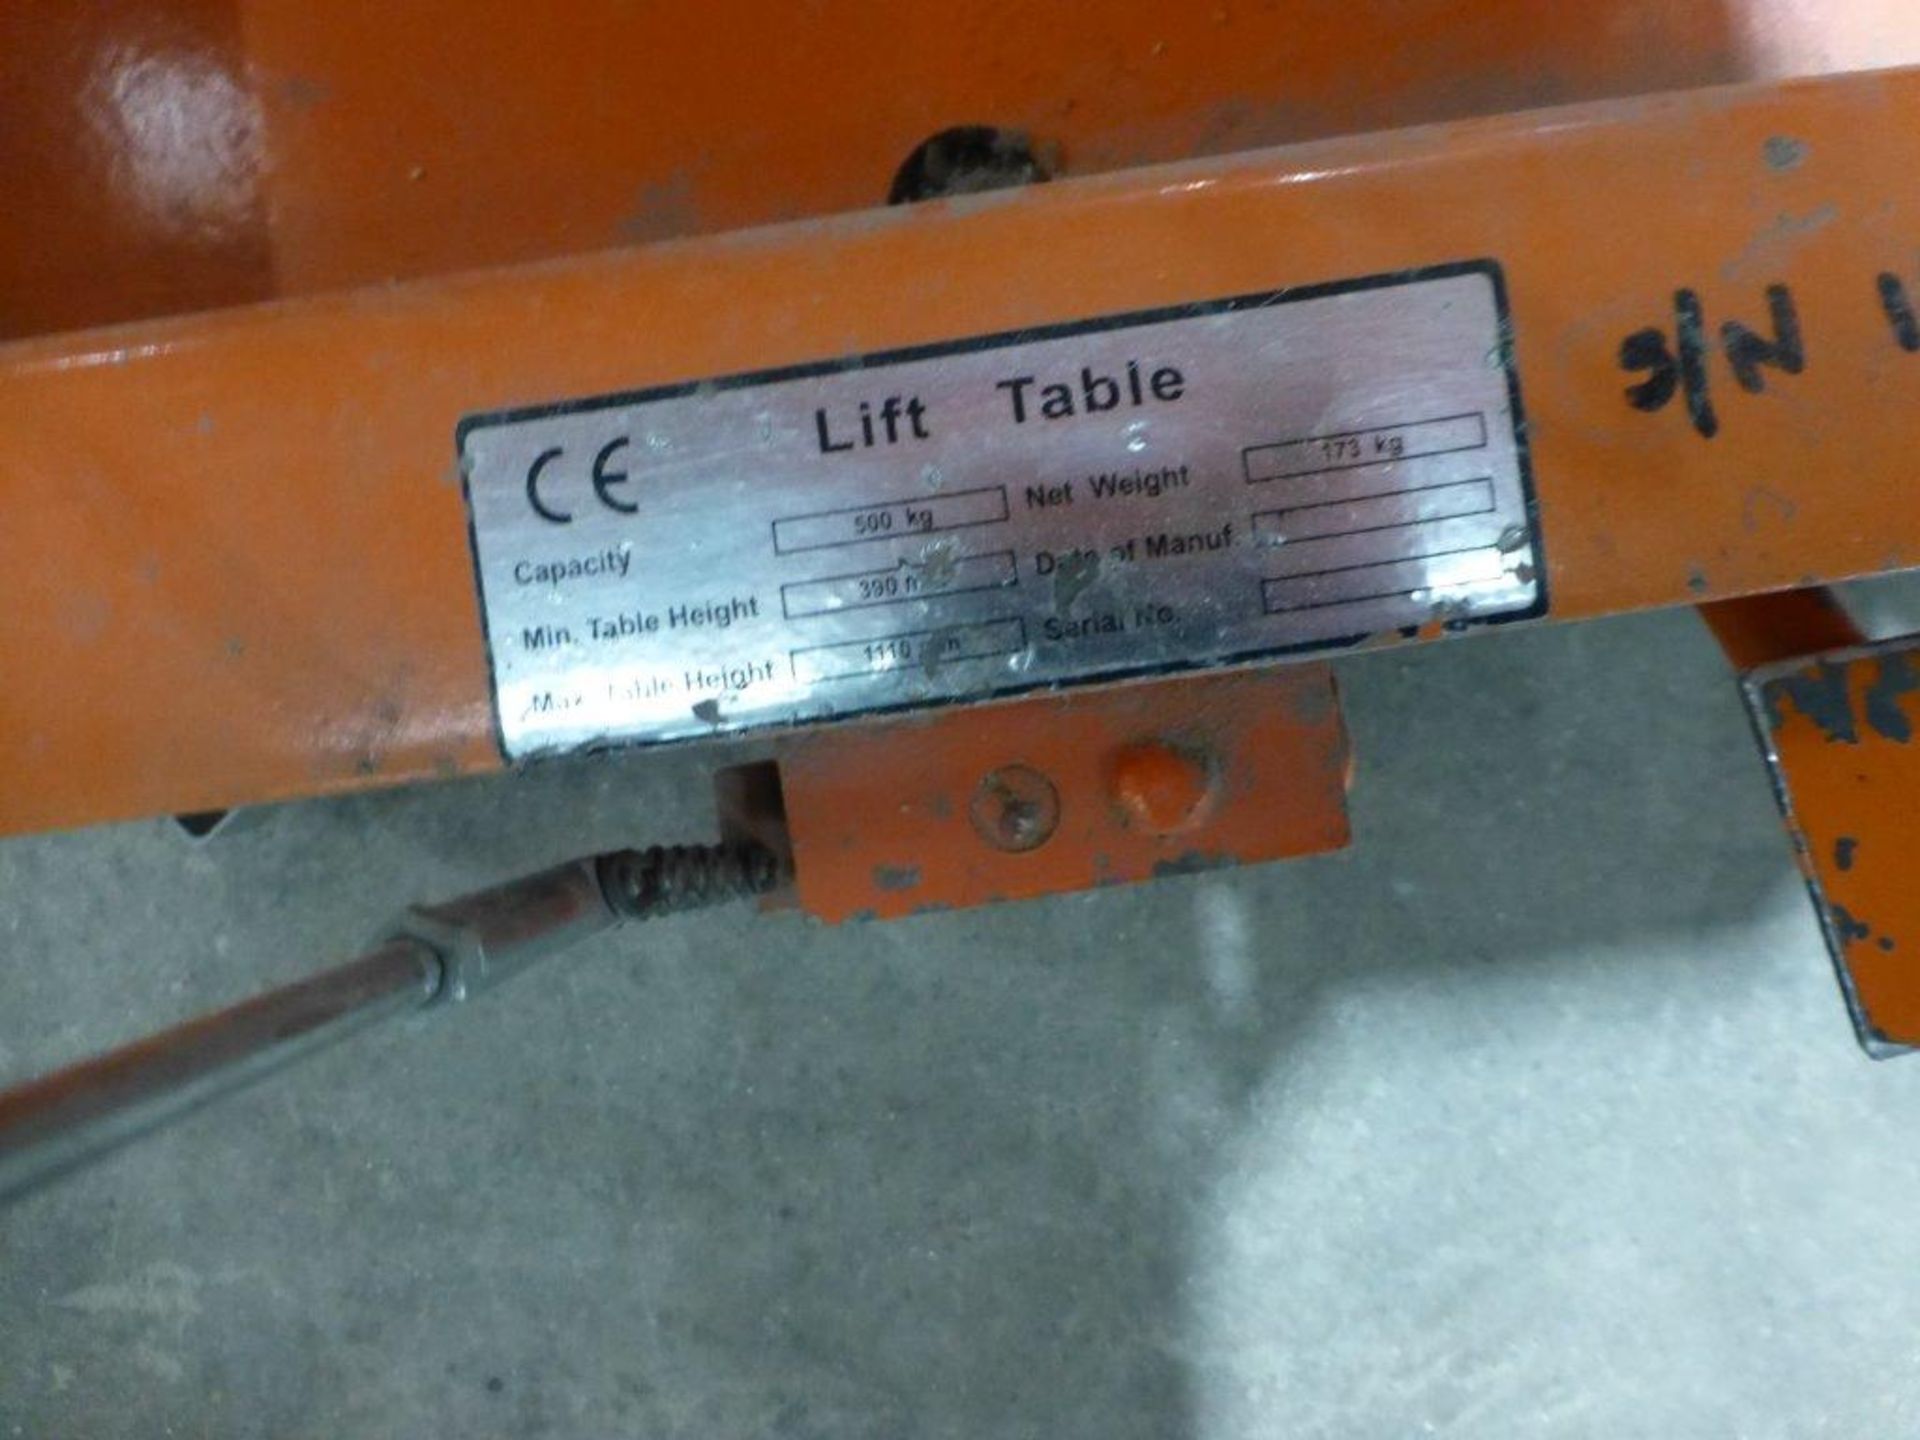 Lift table - Image 3 of 3